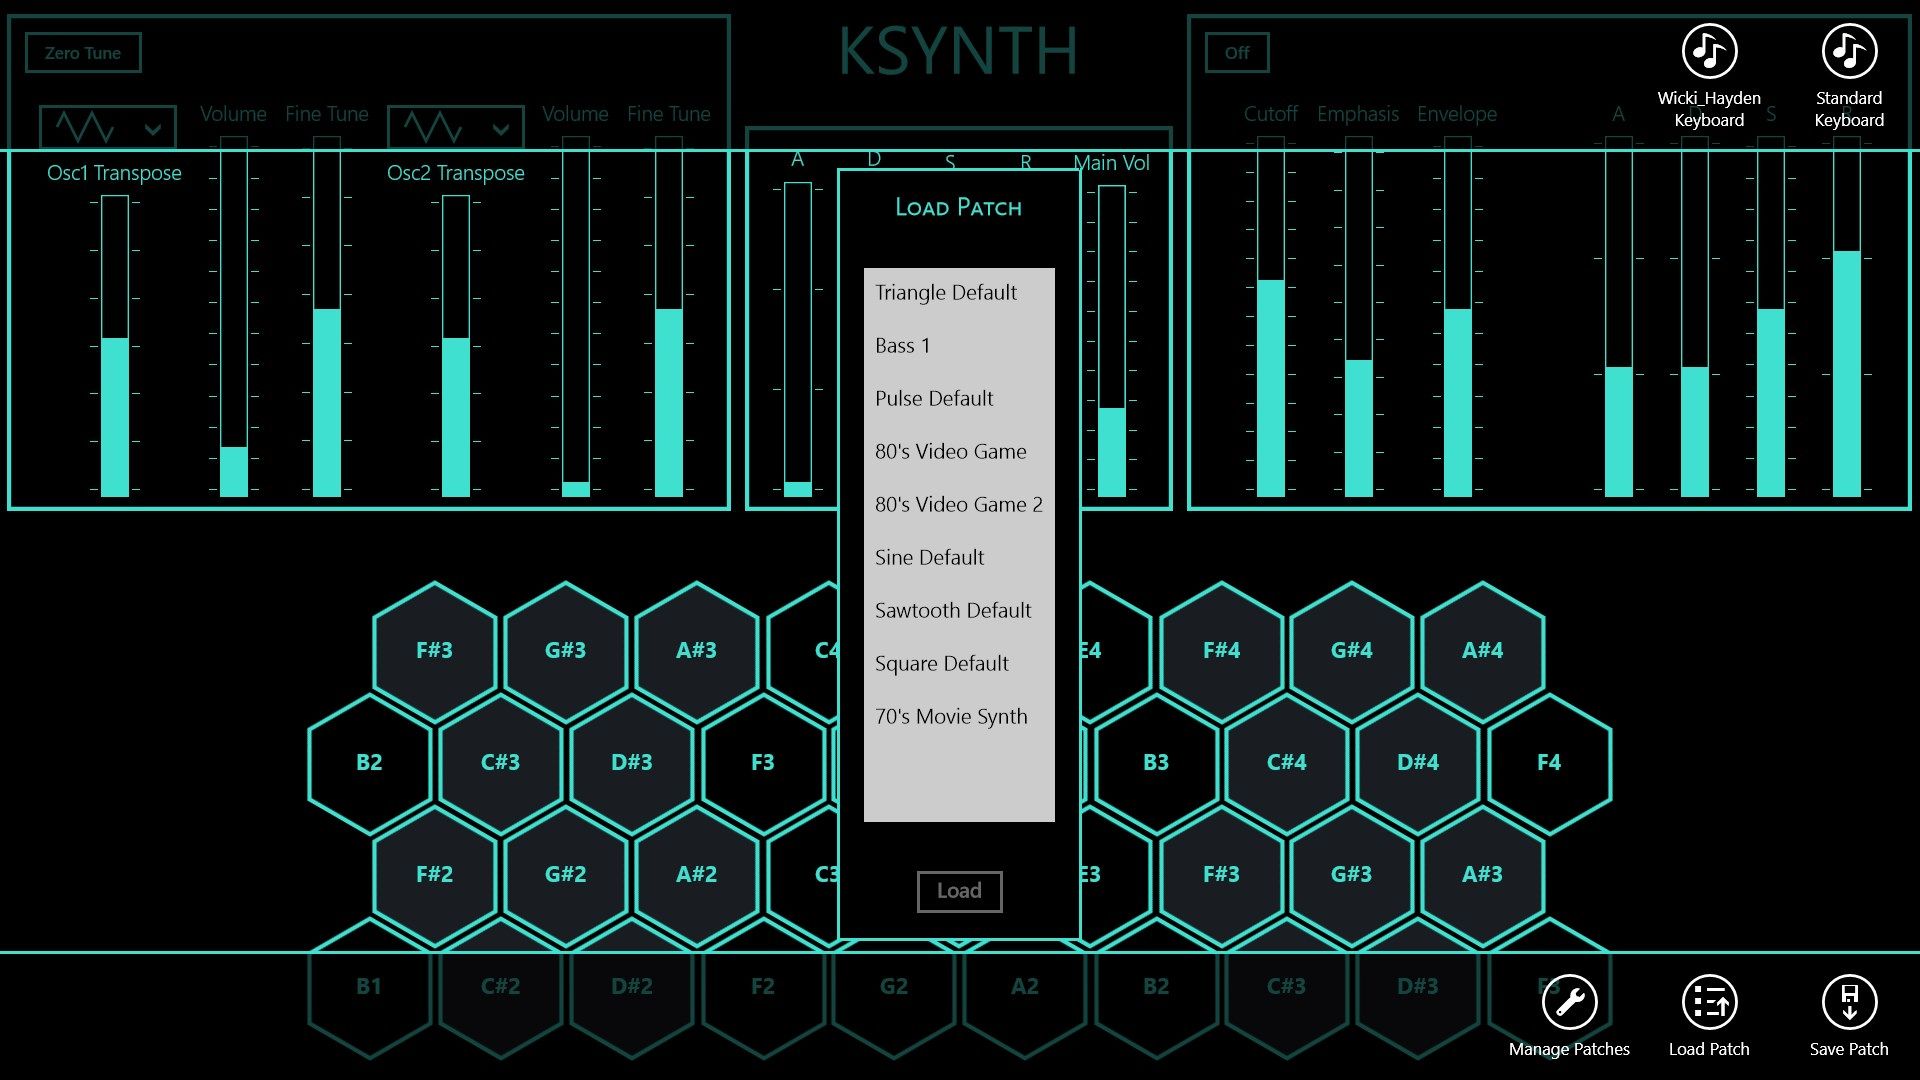 KSYNTH Default Patches